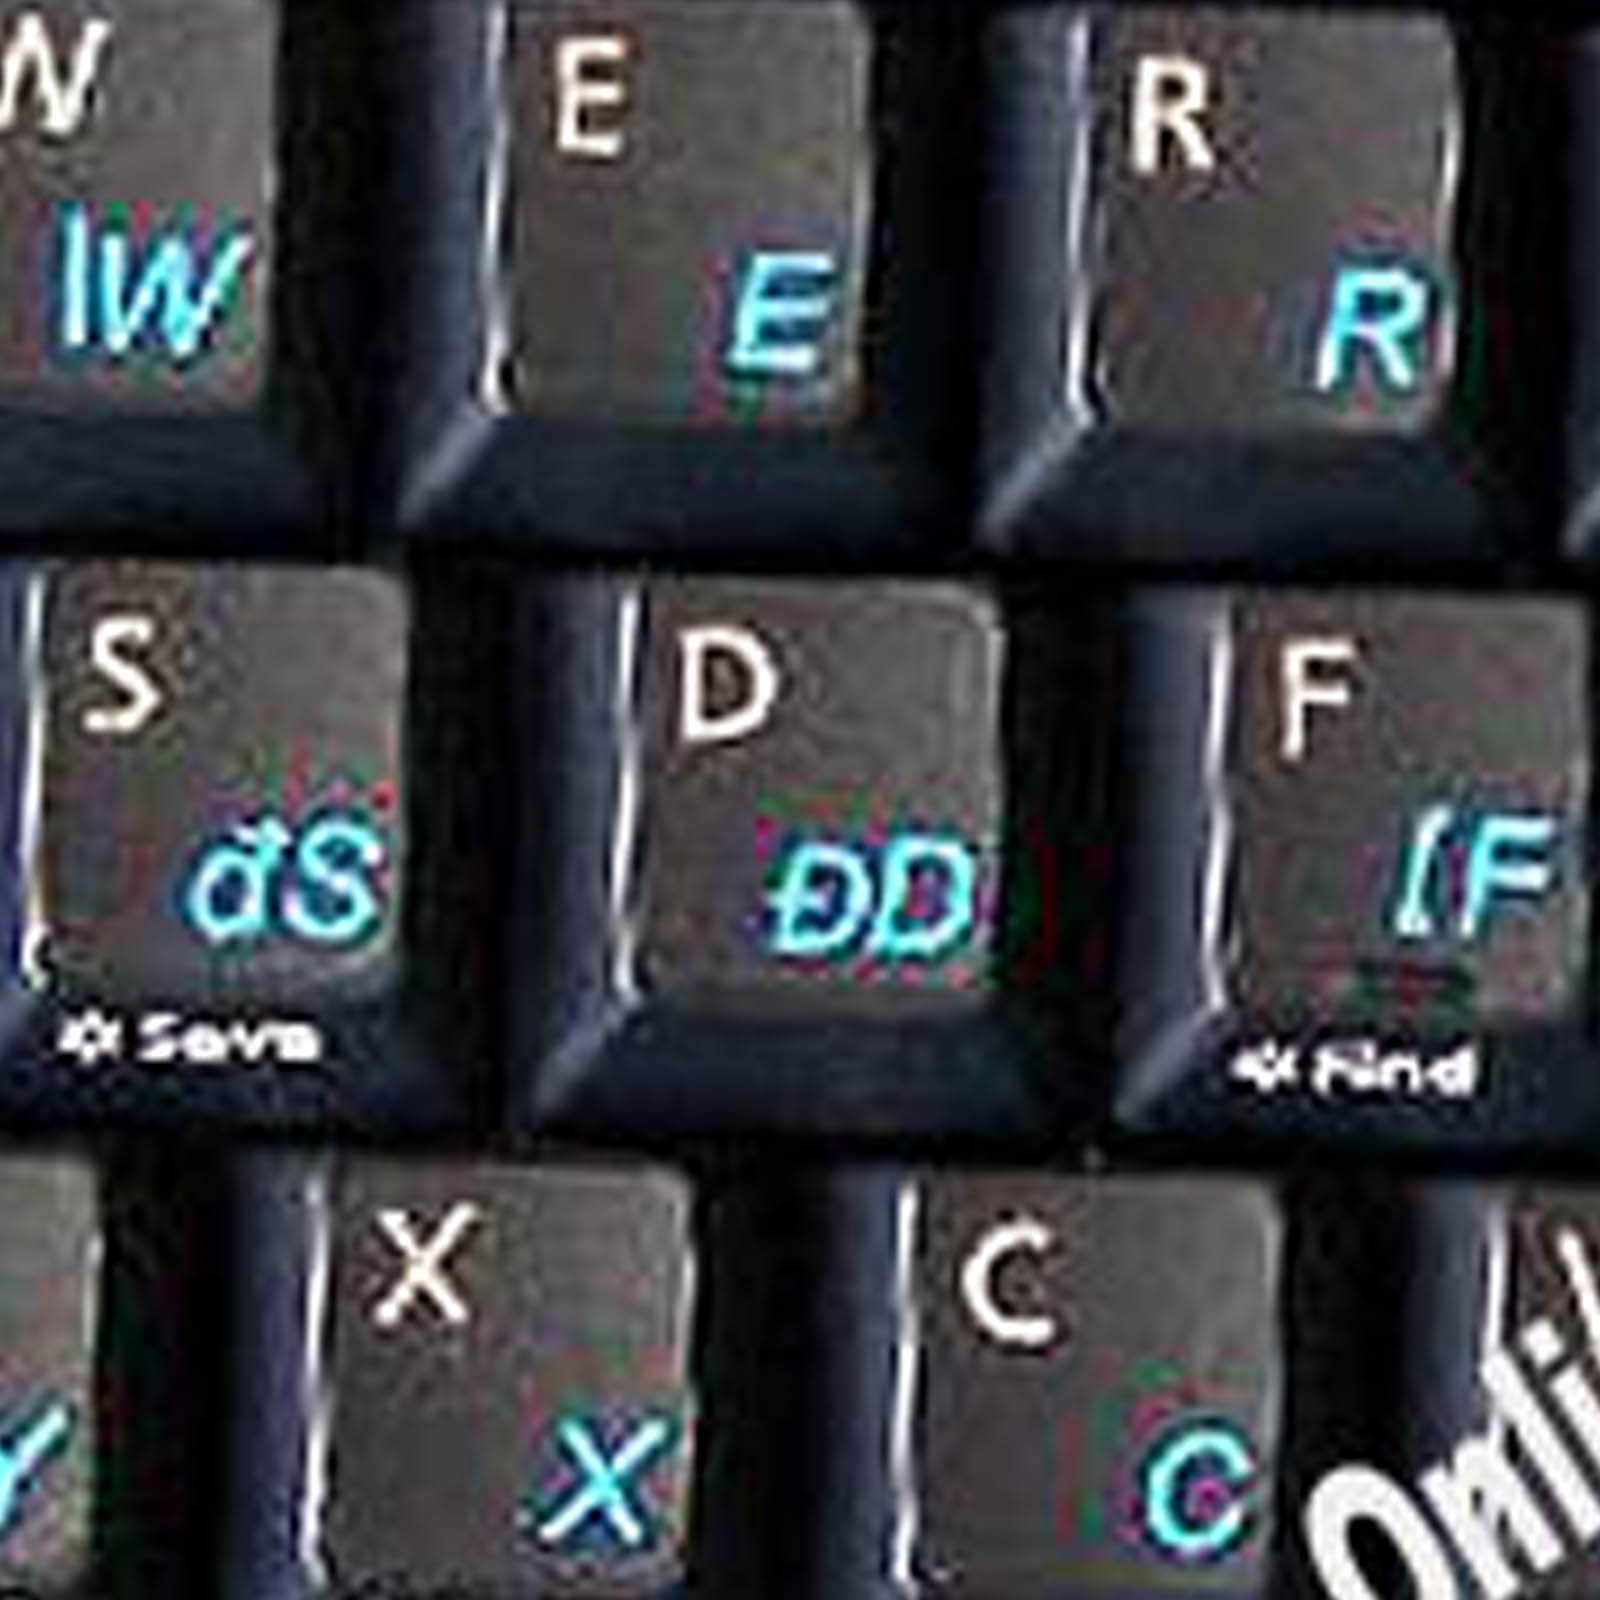 ALBANIAN KEYBOARD STICKERS BLUE LETTERS TRANSPARENT BACKGROUND